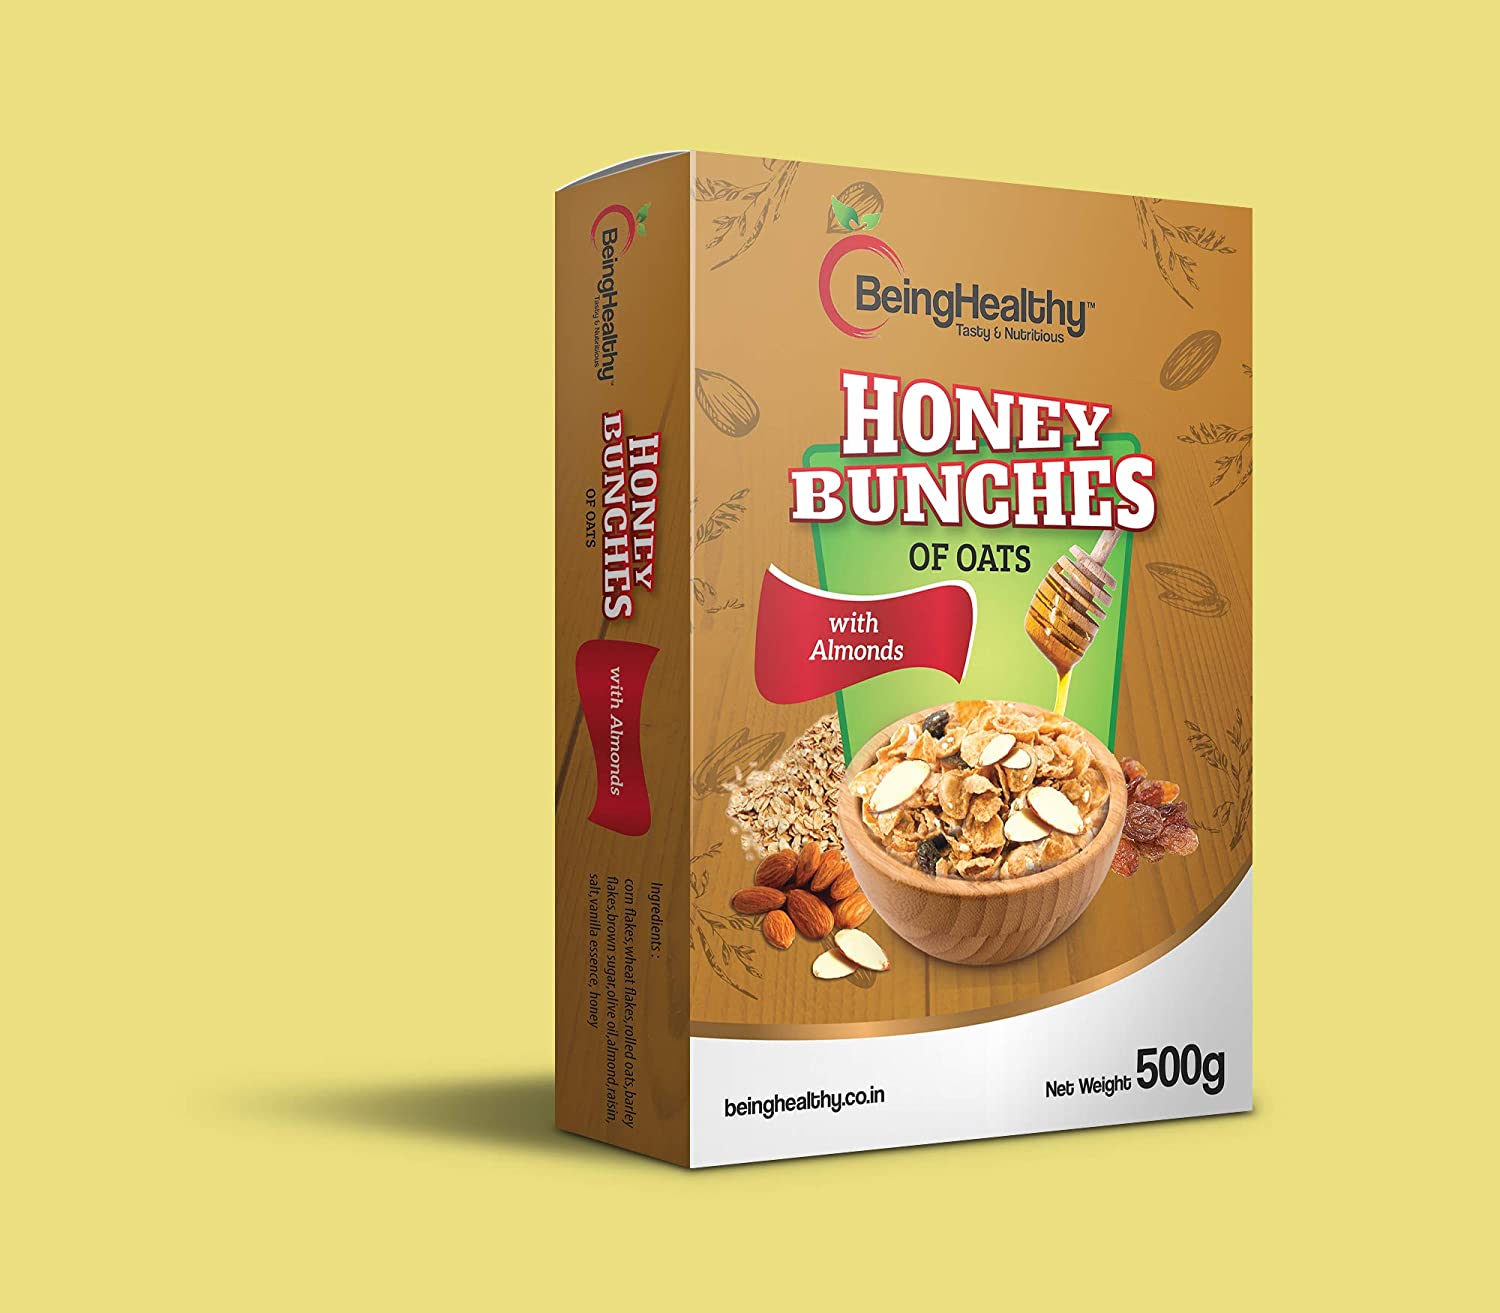 Being Healthy Honey Bunches of Oats With Almonds Image